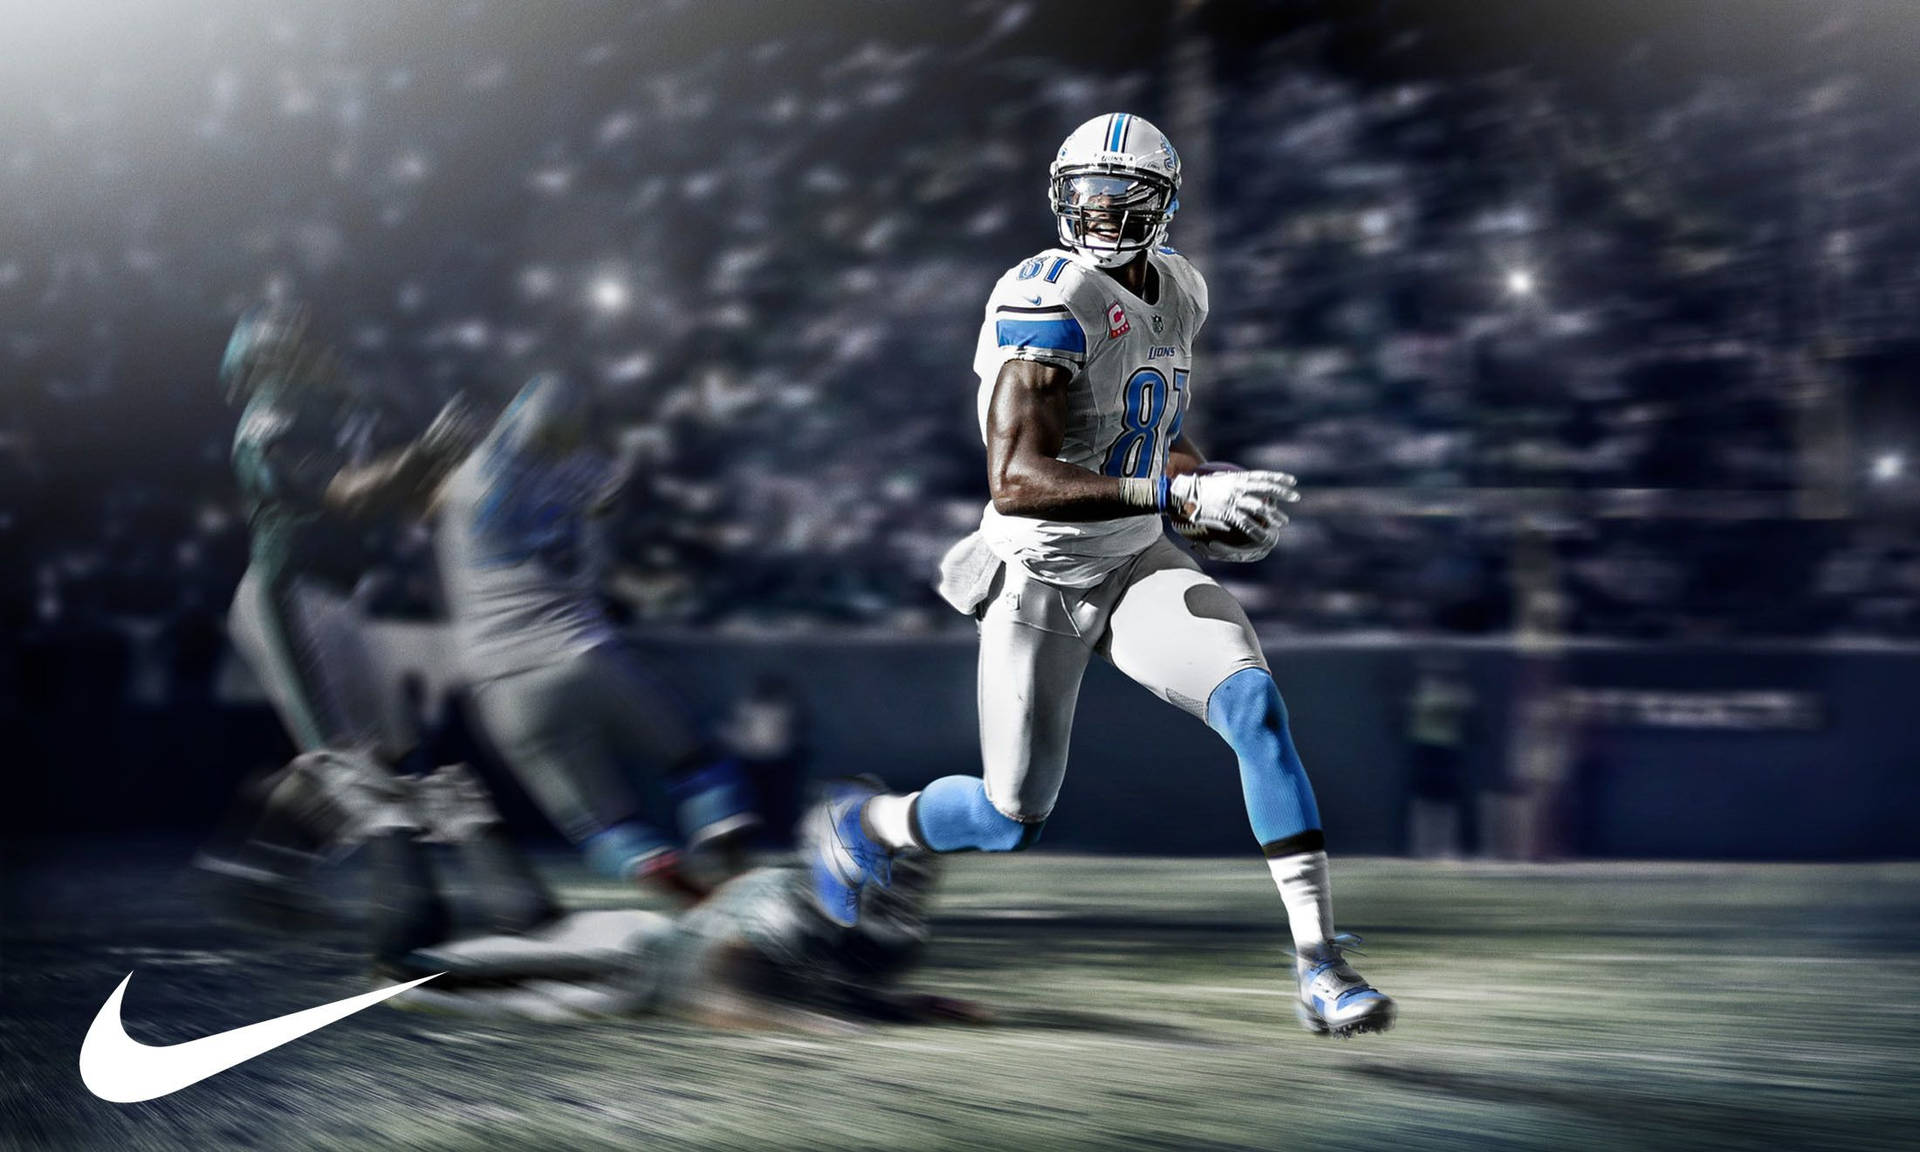 Legendary Running Back Barry Sanders In Action During His Detroit Lions Days. Wallpaper